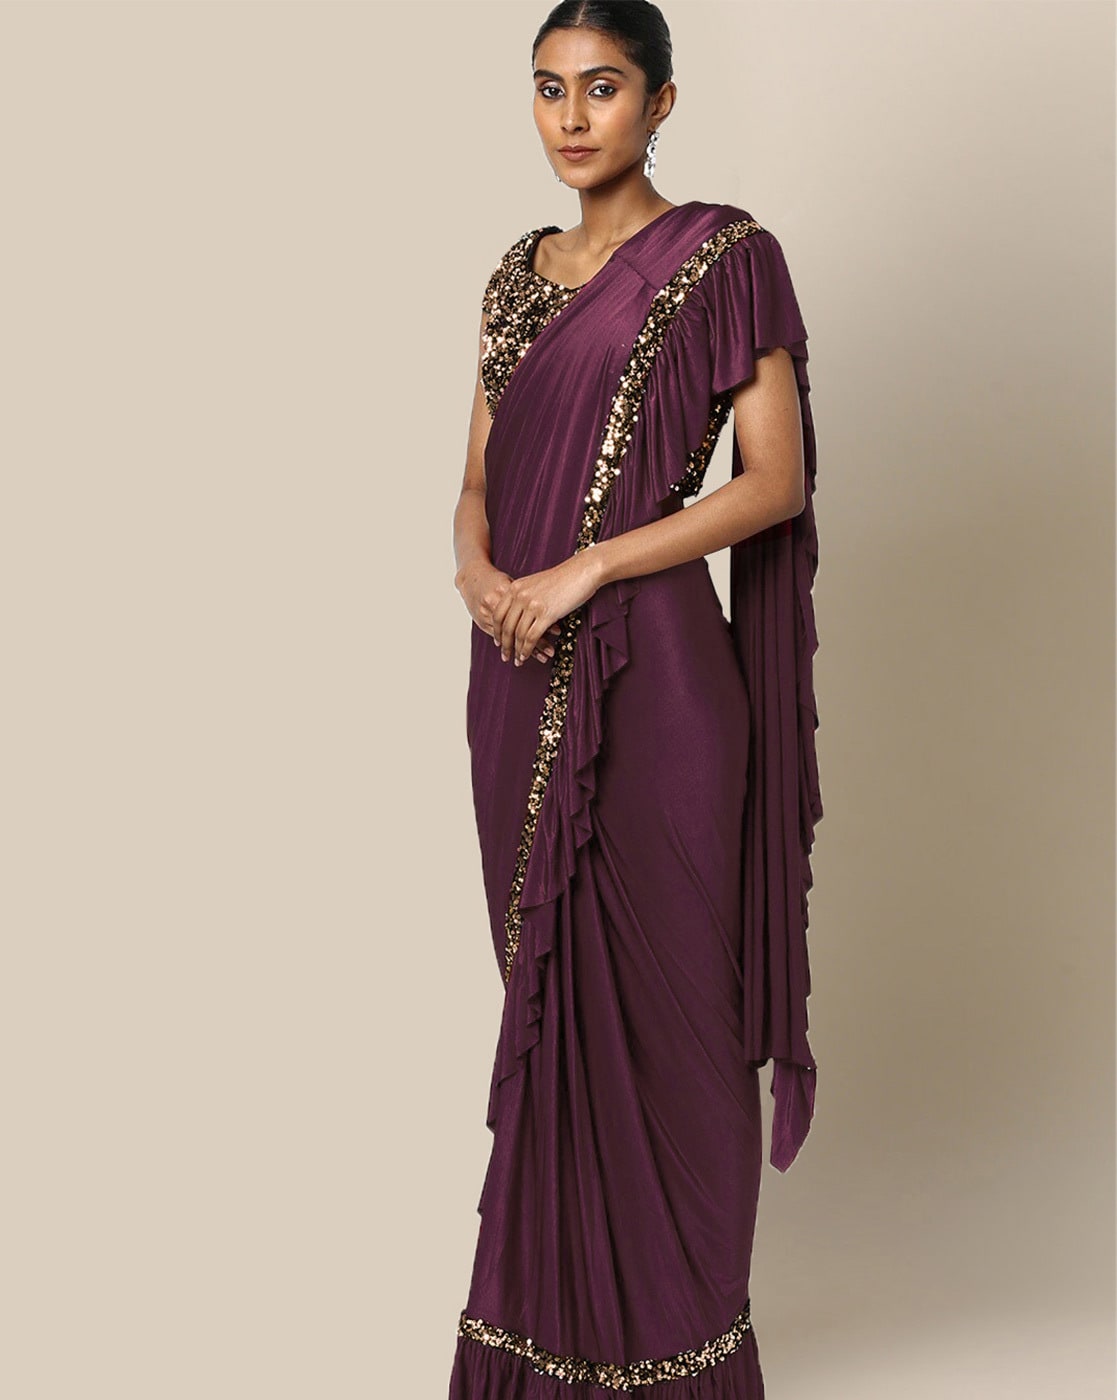 Womens Stunning Ready To Wear fancy silk Saree for Marriage Function  VT01057 - Vtsarees.com